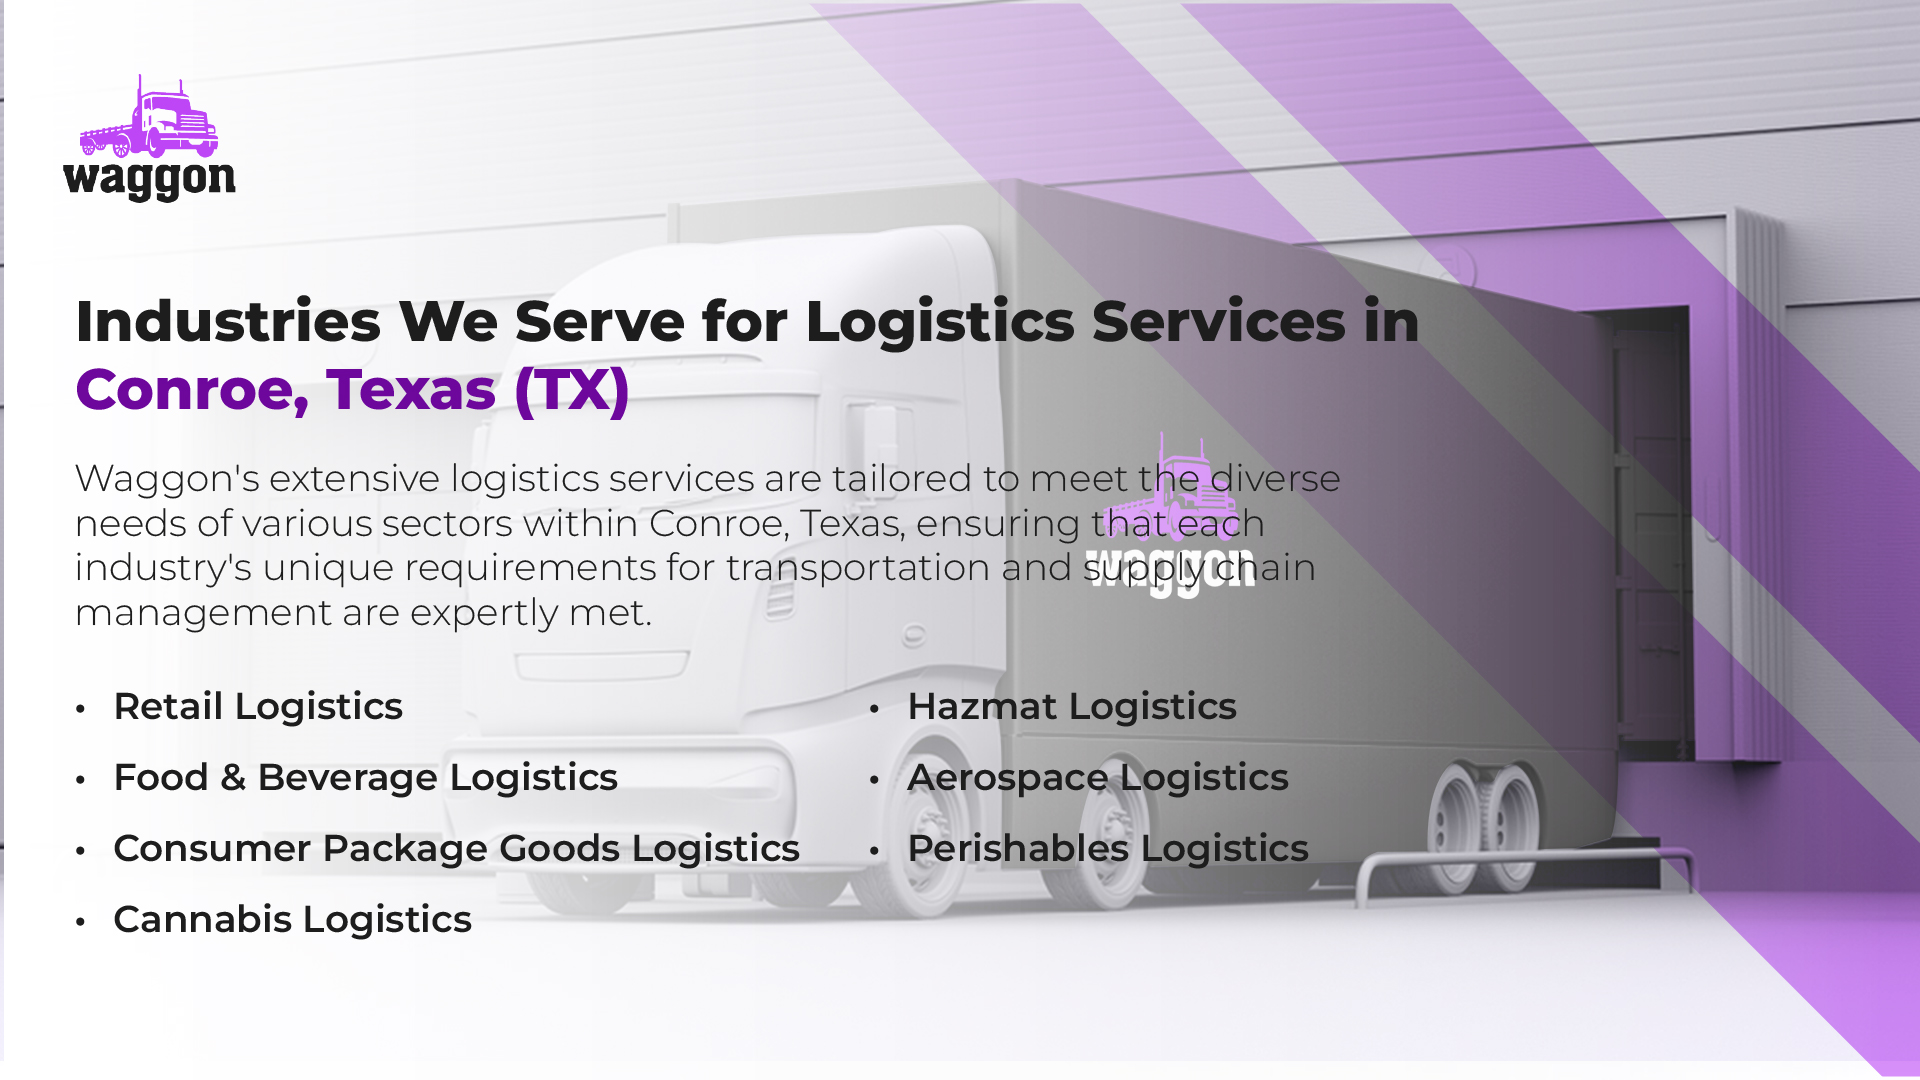 Industries We Serve for Logistics Services in Conroe, Texas (TX)